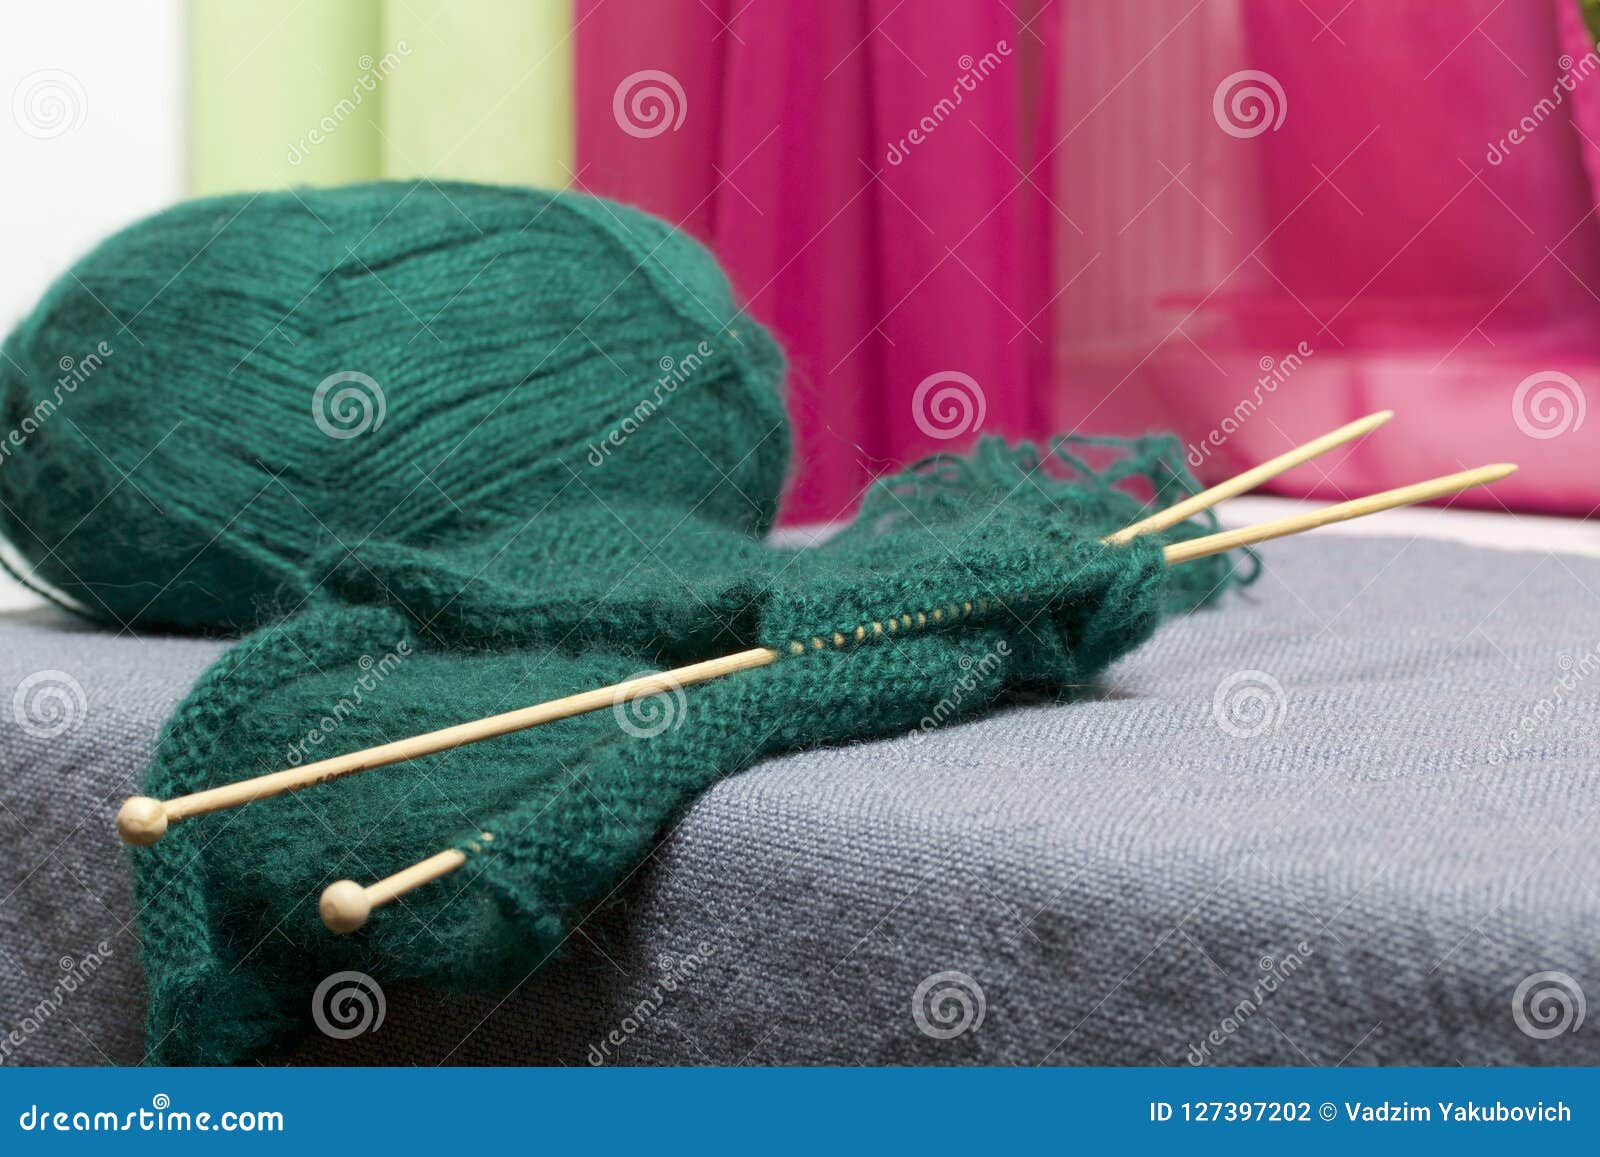 Knitting with Wooden Knitting. a Ball of Dark Green Thread and Wooden ...